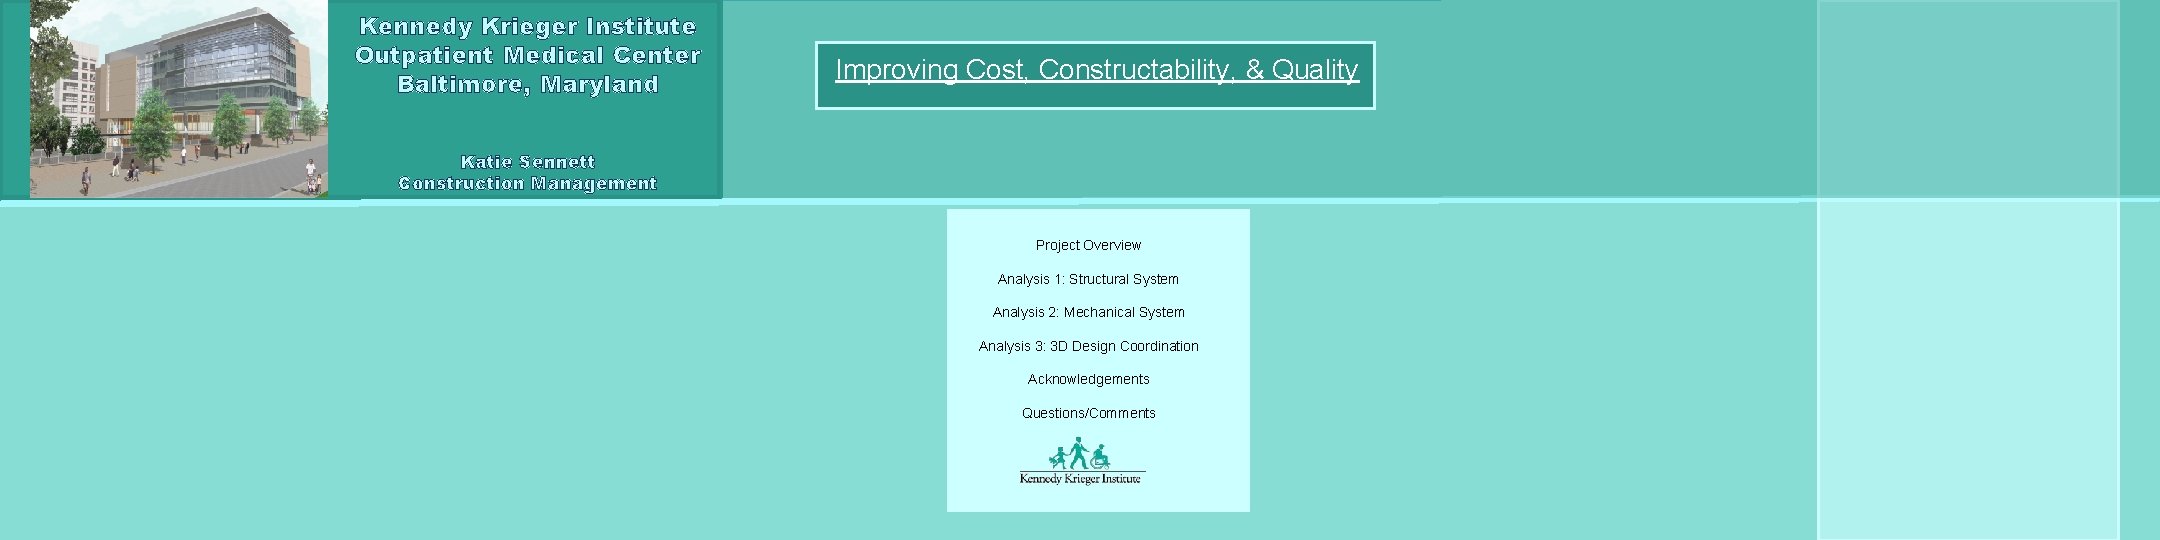 Kennedy Krieger Institute Outpatient Medical Center Baltimore, Maryland Improving Cost, Constructability, & Quality Katie